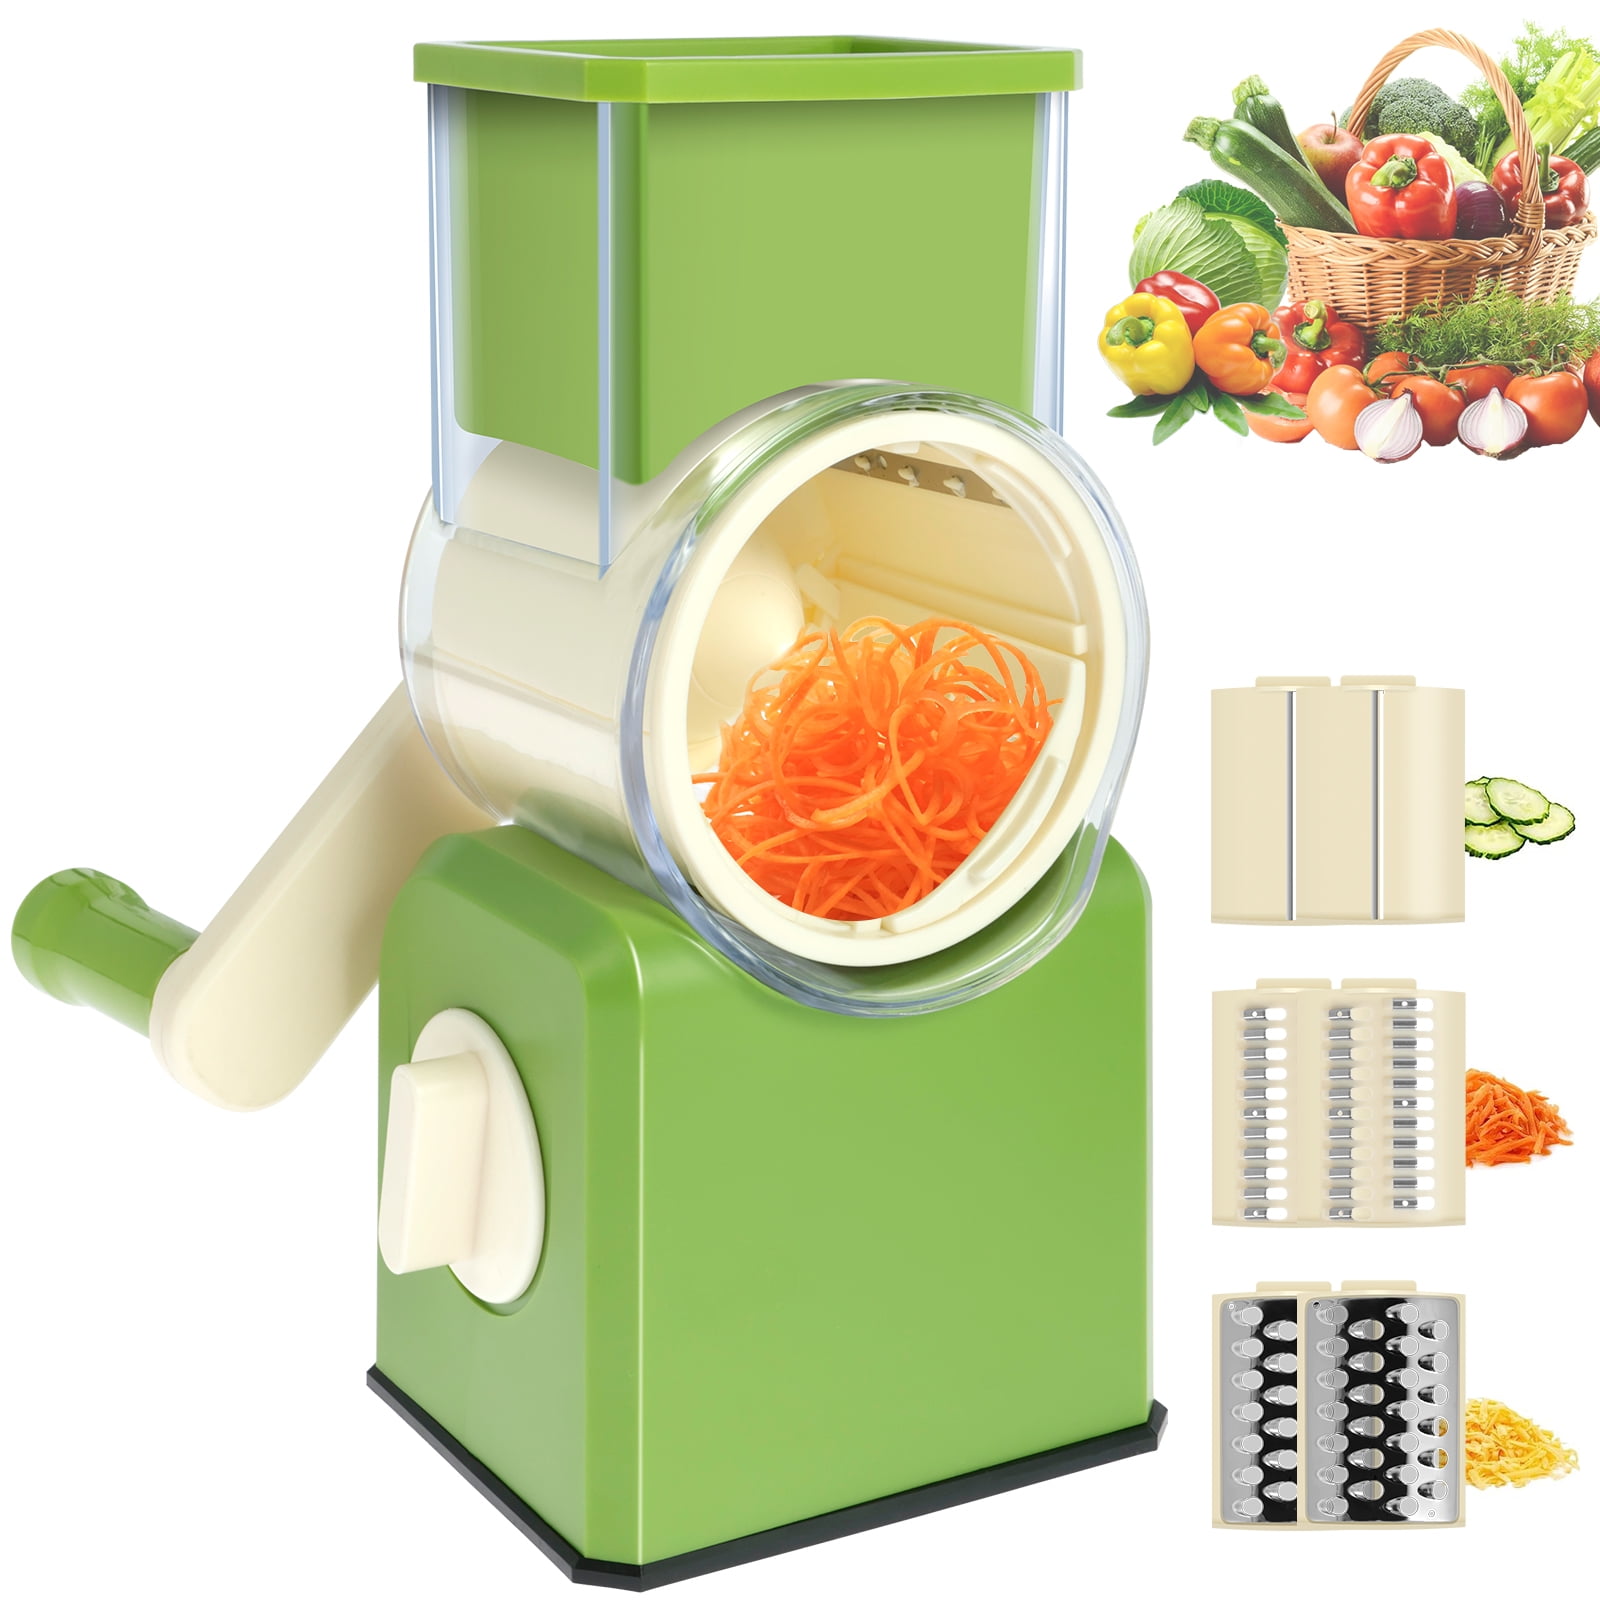 Rotary Grater – Handheld Manual Crank Shredder Kitchen Cooking Accessory  with 3 Drums for Cheese, Chocolate, Nuts and Vegetables by Classic Cuisine  